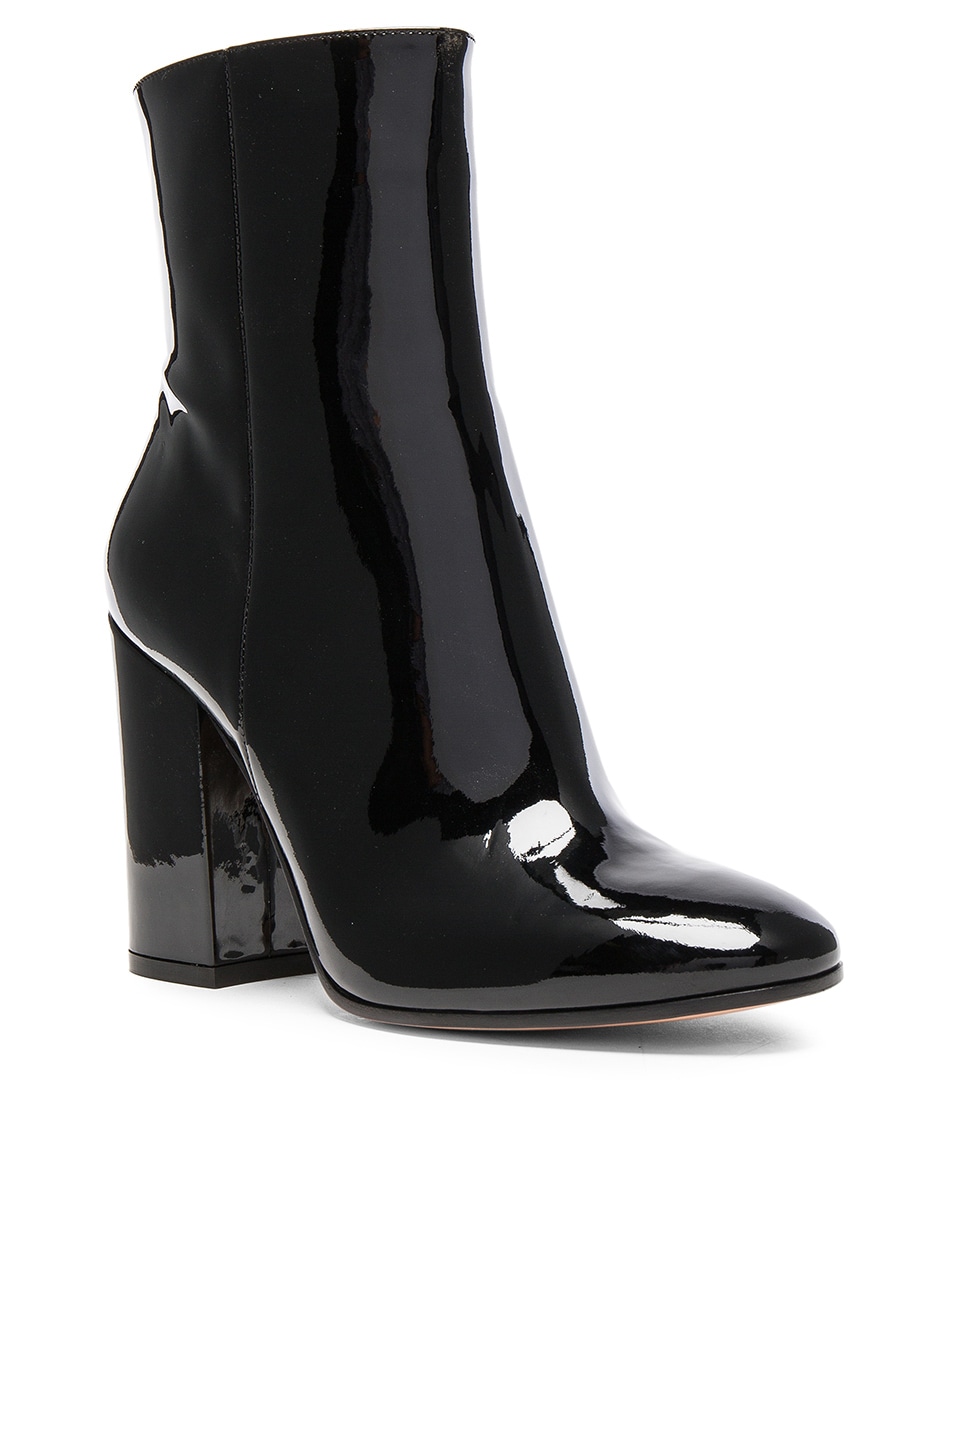 Gianvito Rossi Patent Leather Rolling High Booties in Black | FWRD